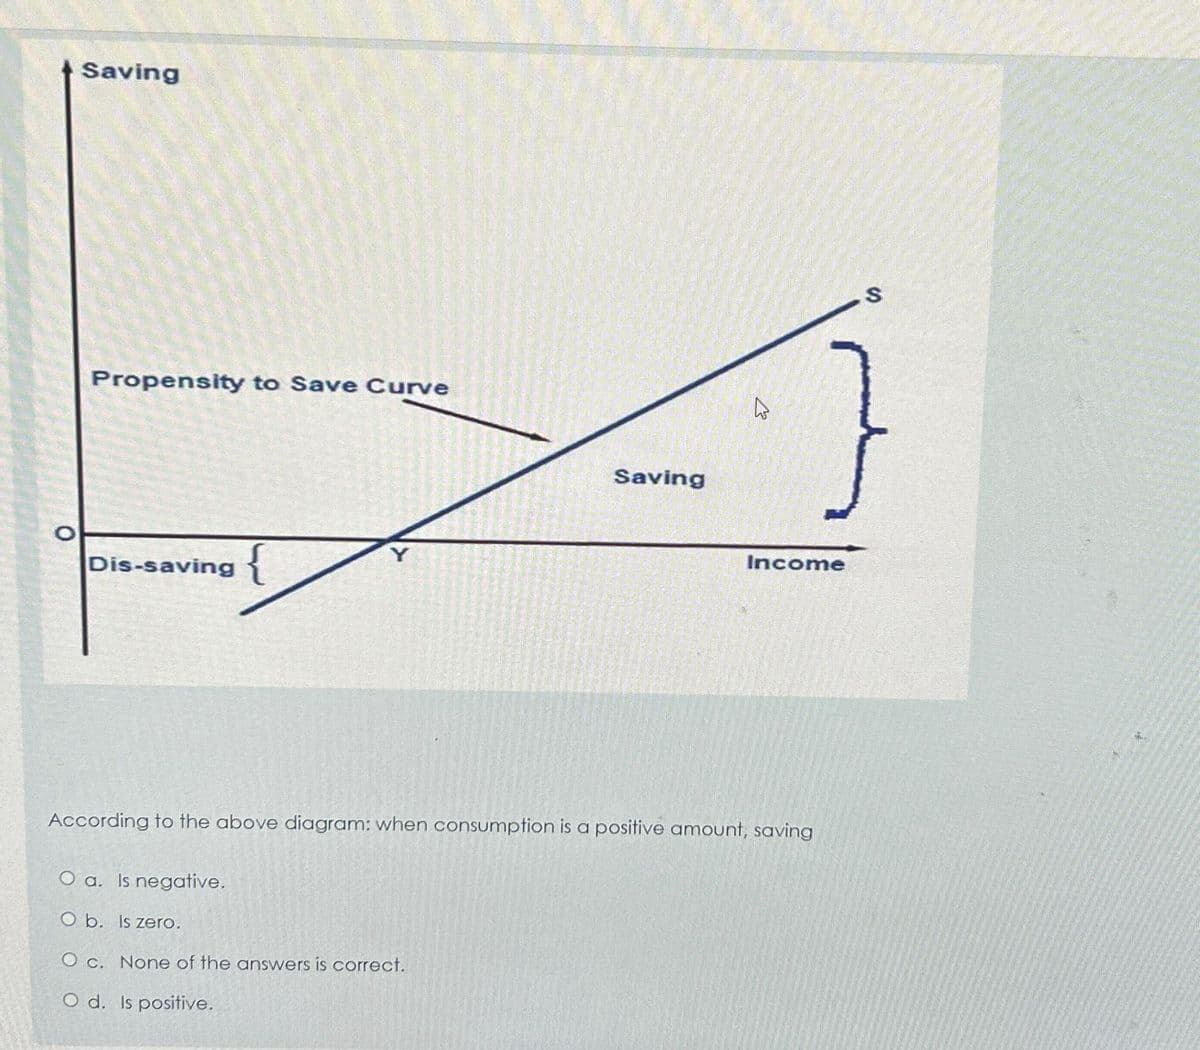 O
Saving
Propensity to Save Curve
Dis-saving {
Saving
O a. Is negative.
O b. Is zero.
O c. None of the answers is correct.
O d. Is positive.
4
Income
According to the above diagram: when consumption is a positive amount, saving
S